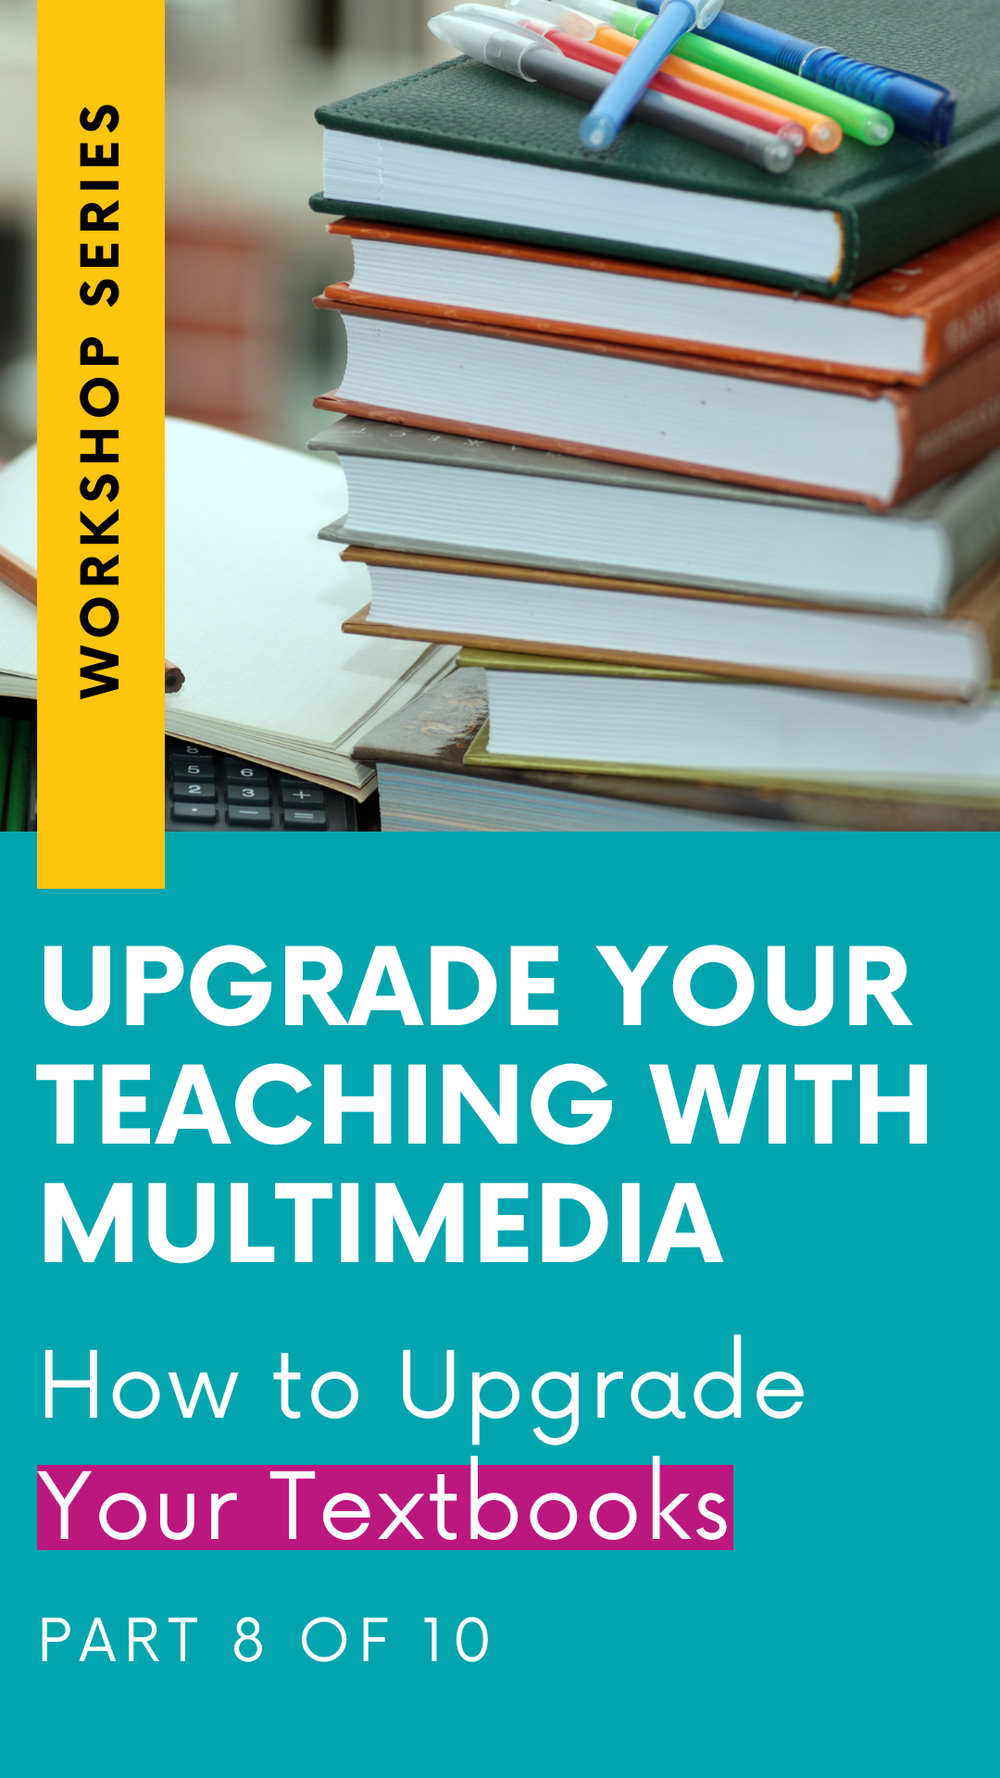 Upgrade Your Textbooks! (From the Upgrade Your Teaching with Multimedia Workshop Series: Part 8) (Copy)